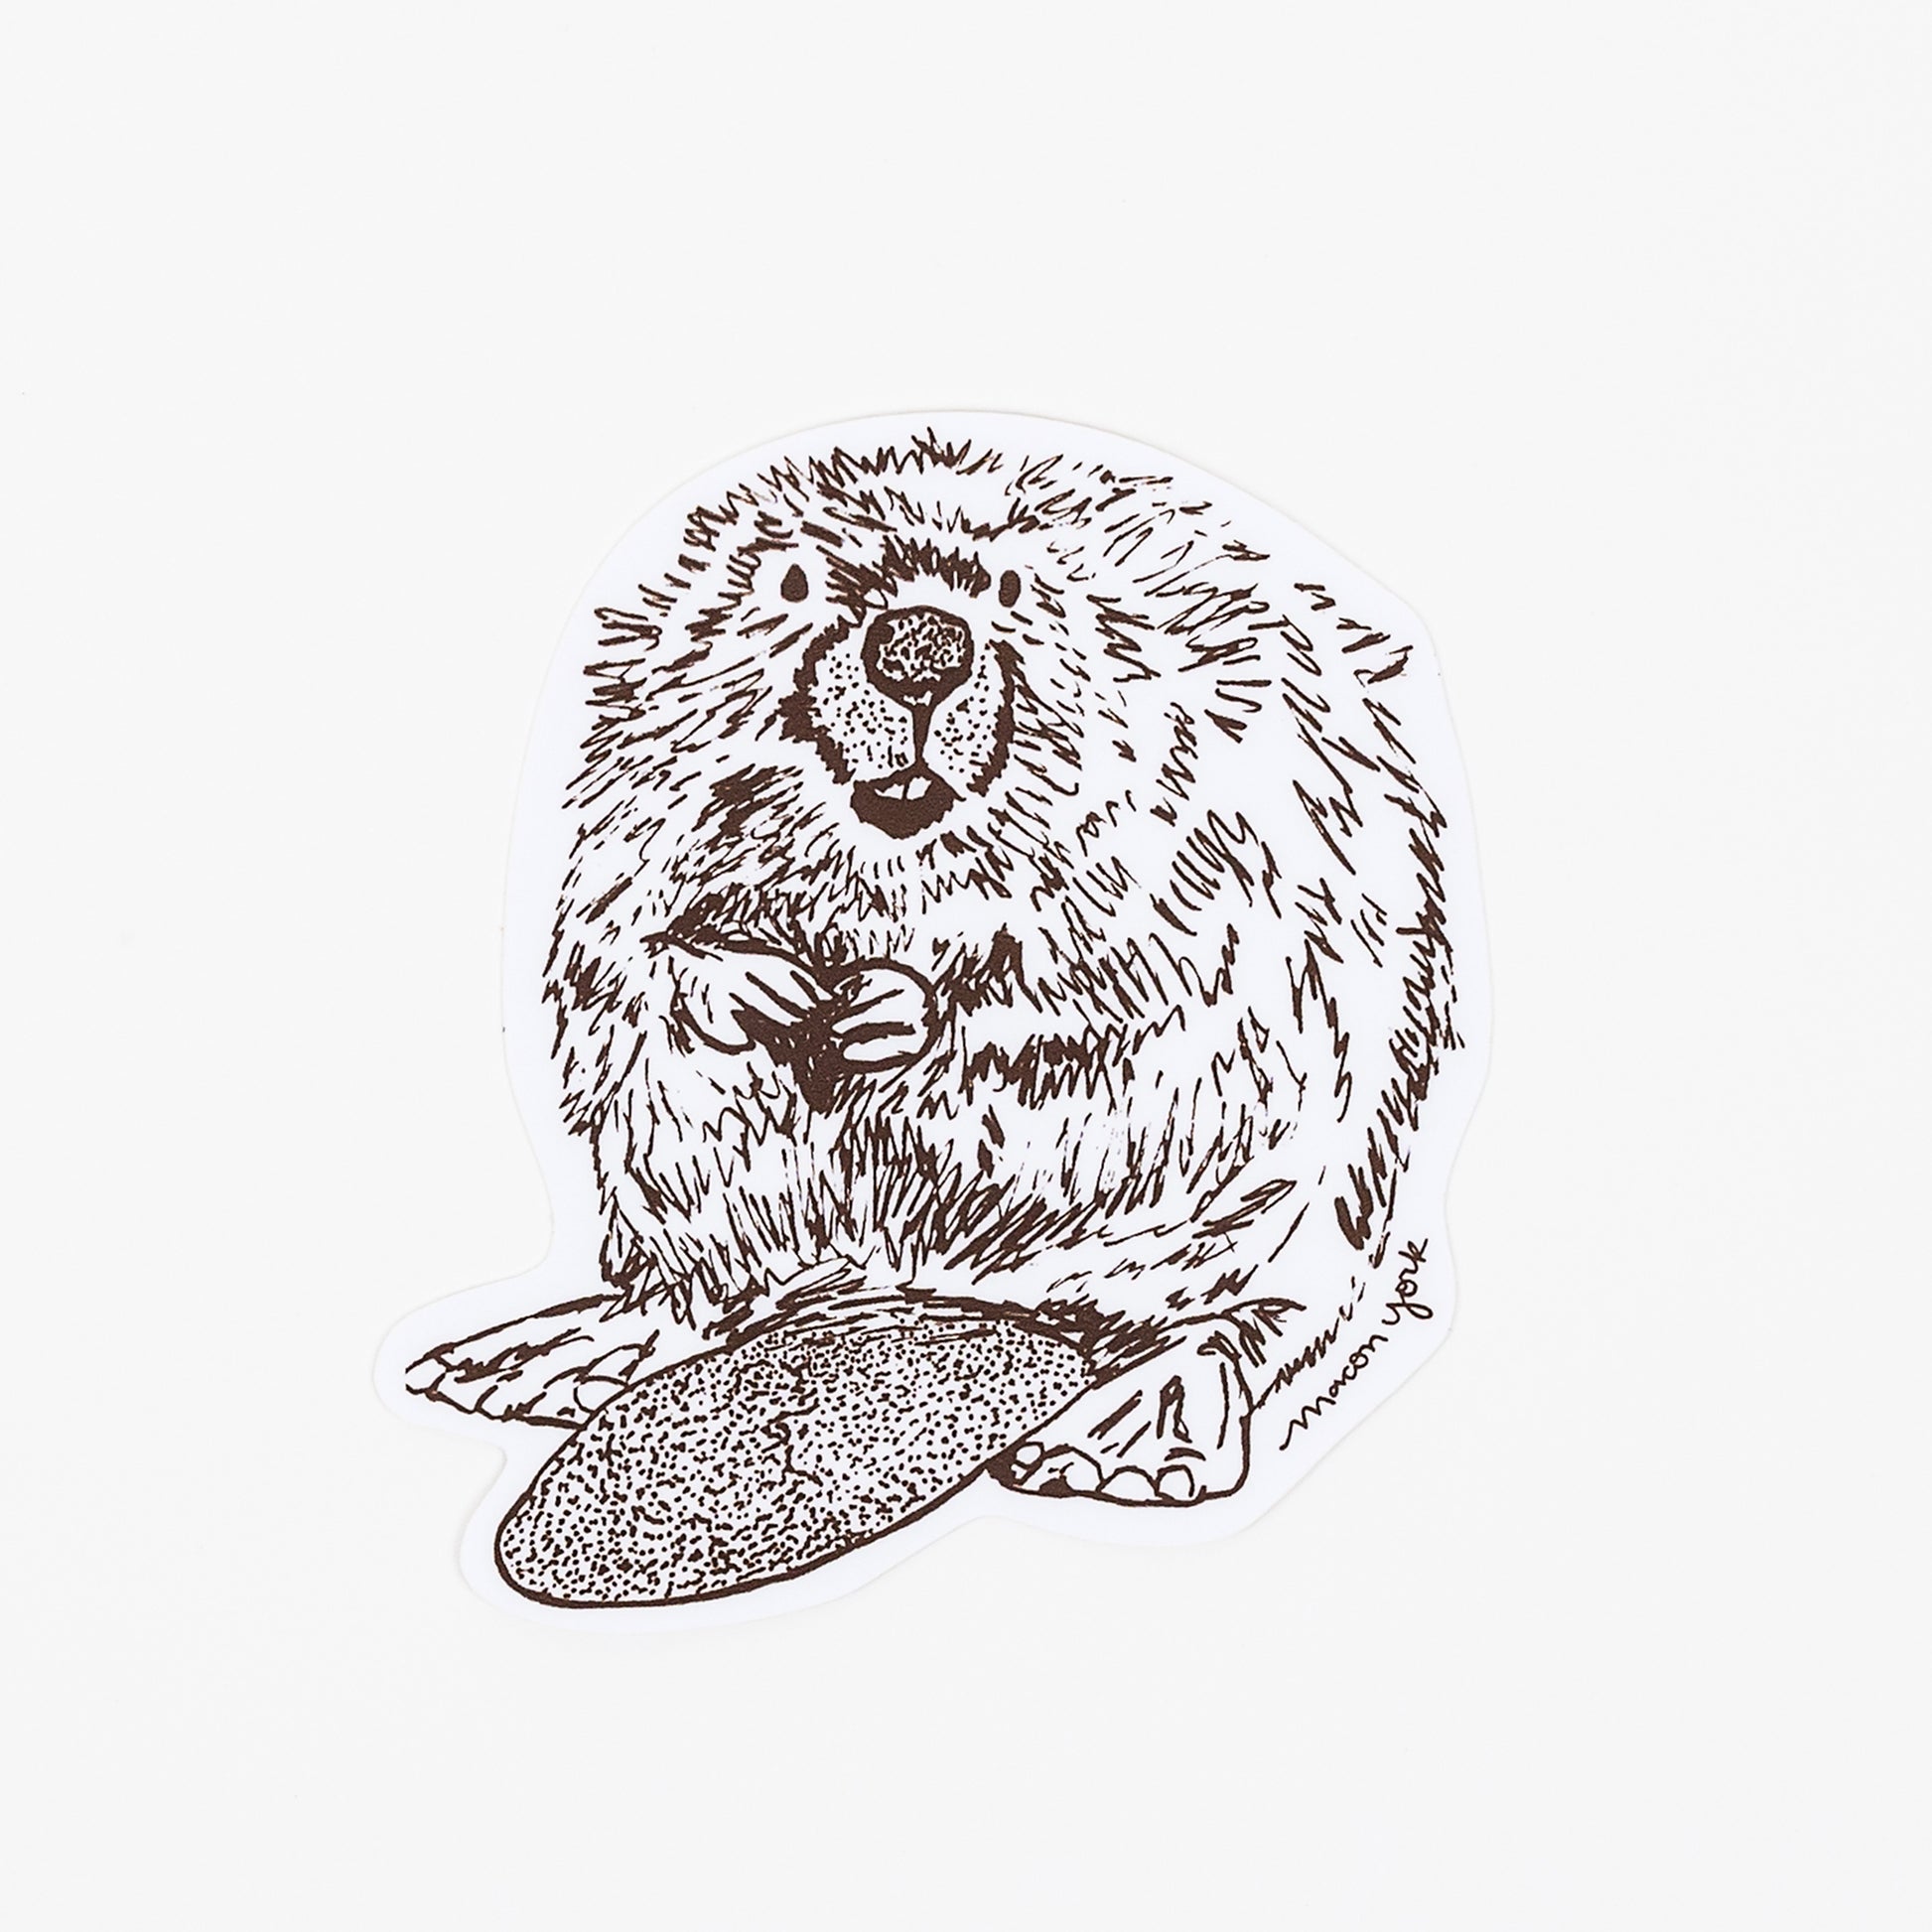 This Beaver is a premium vinyl sticker that captures the beauty of the summertime Appalachian mountains. It features a hand-drawn image of the an Appalachian Beaver in a rich brown ink. 3.5" x 3.5" Vinyl Sticker.